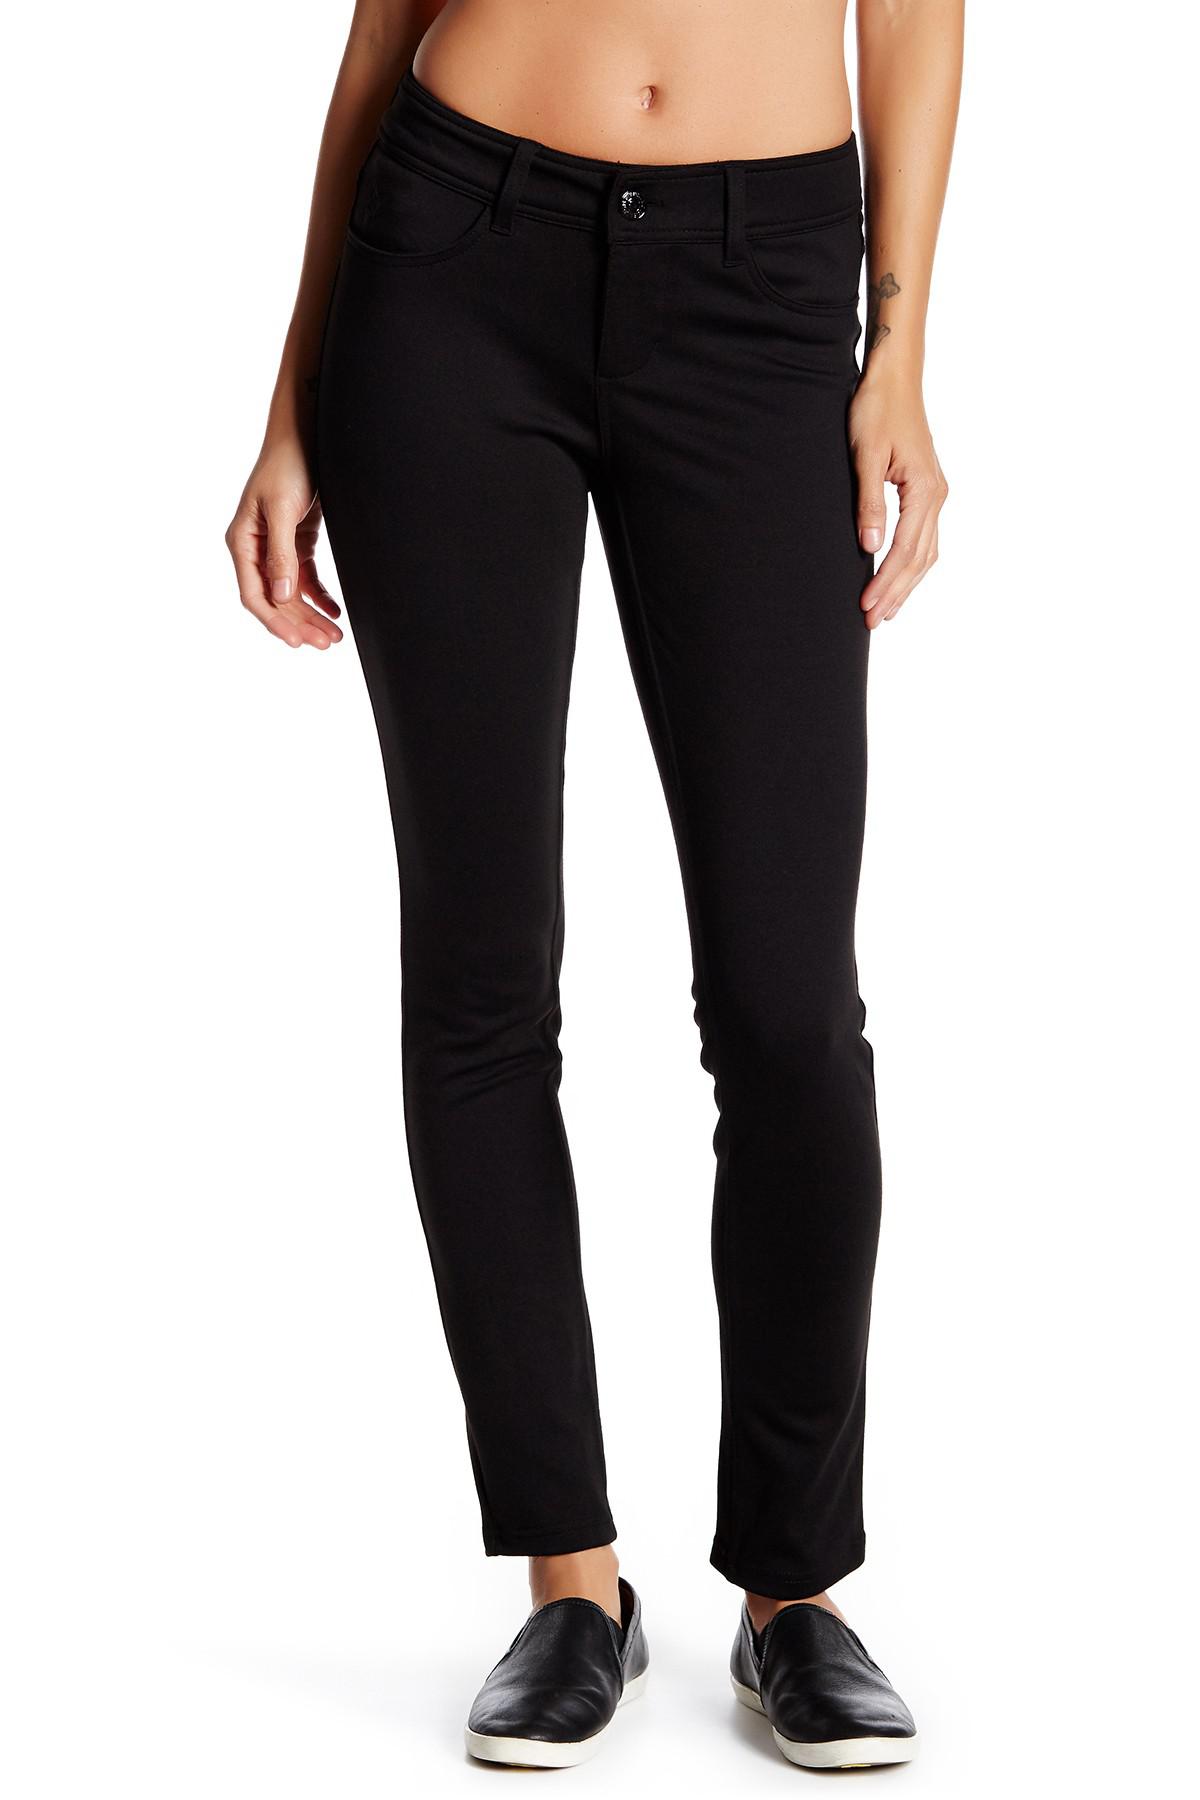 Seven7 Synthetic Skinny Ponte Pant in Black - Lyst